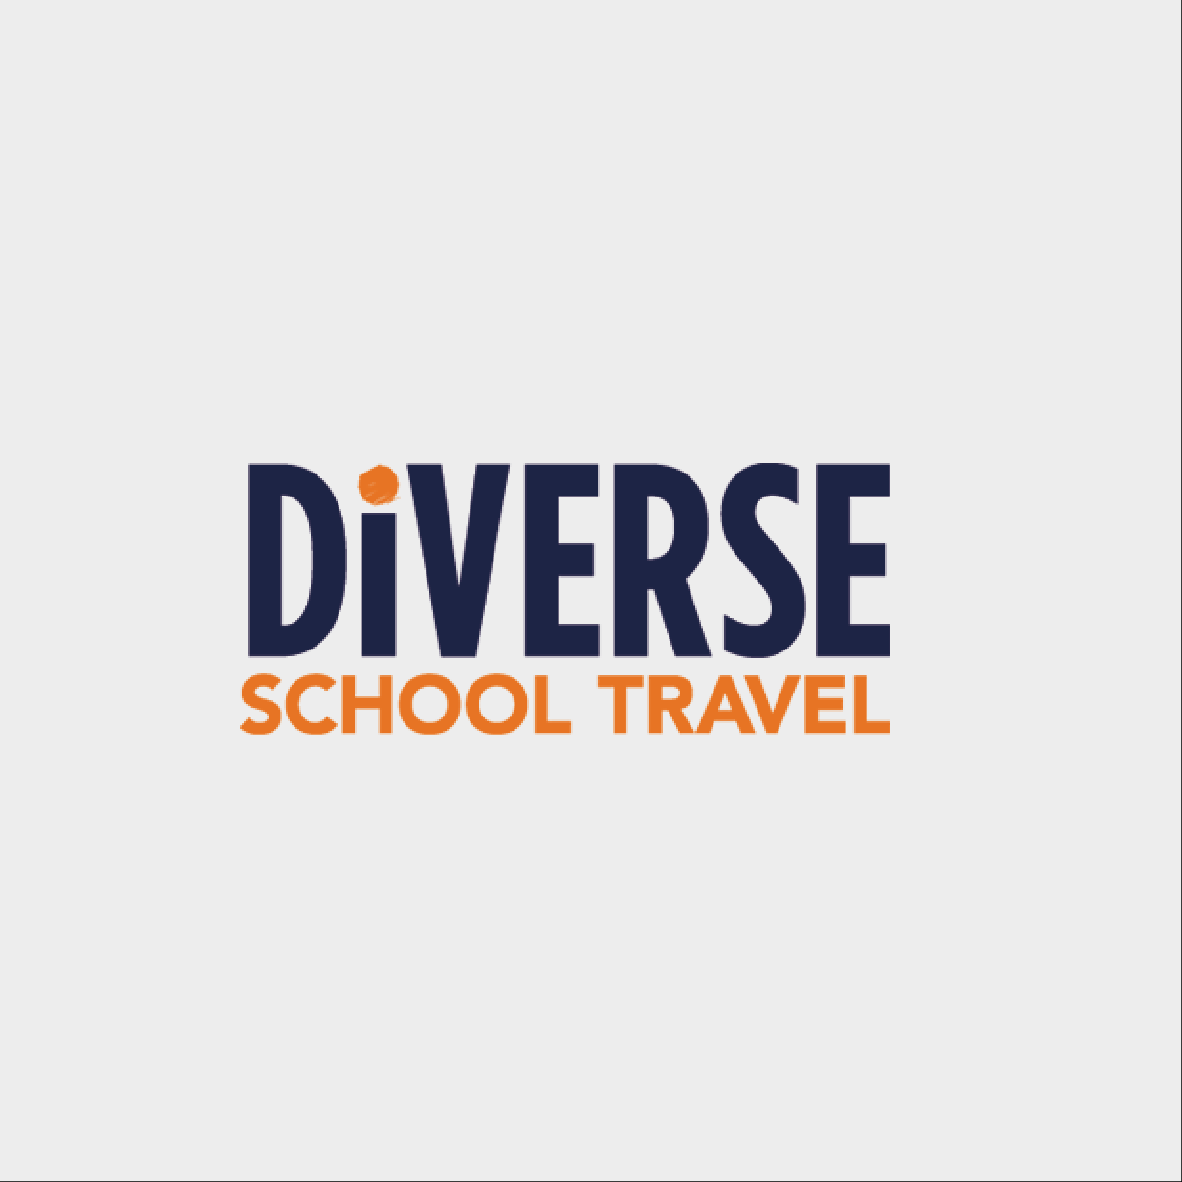 Diverse School Travel Seed